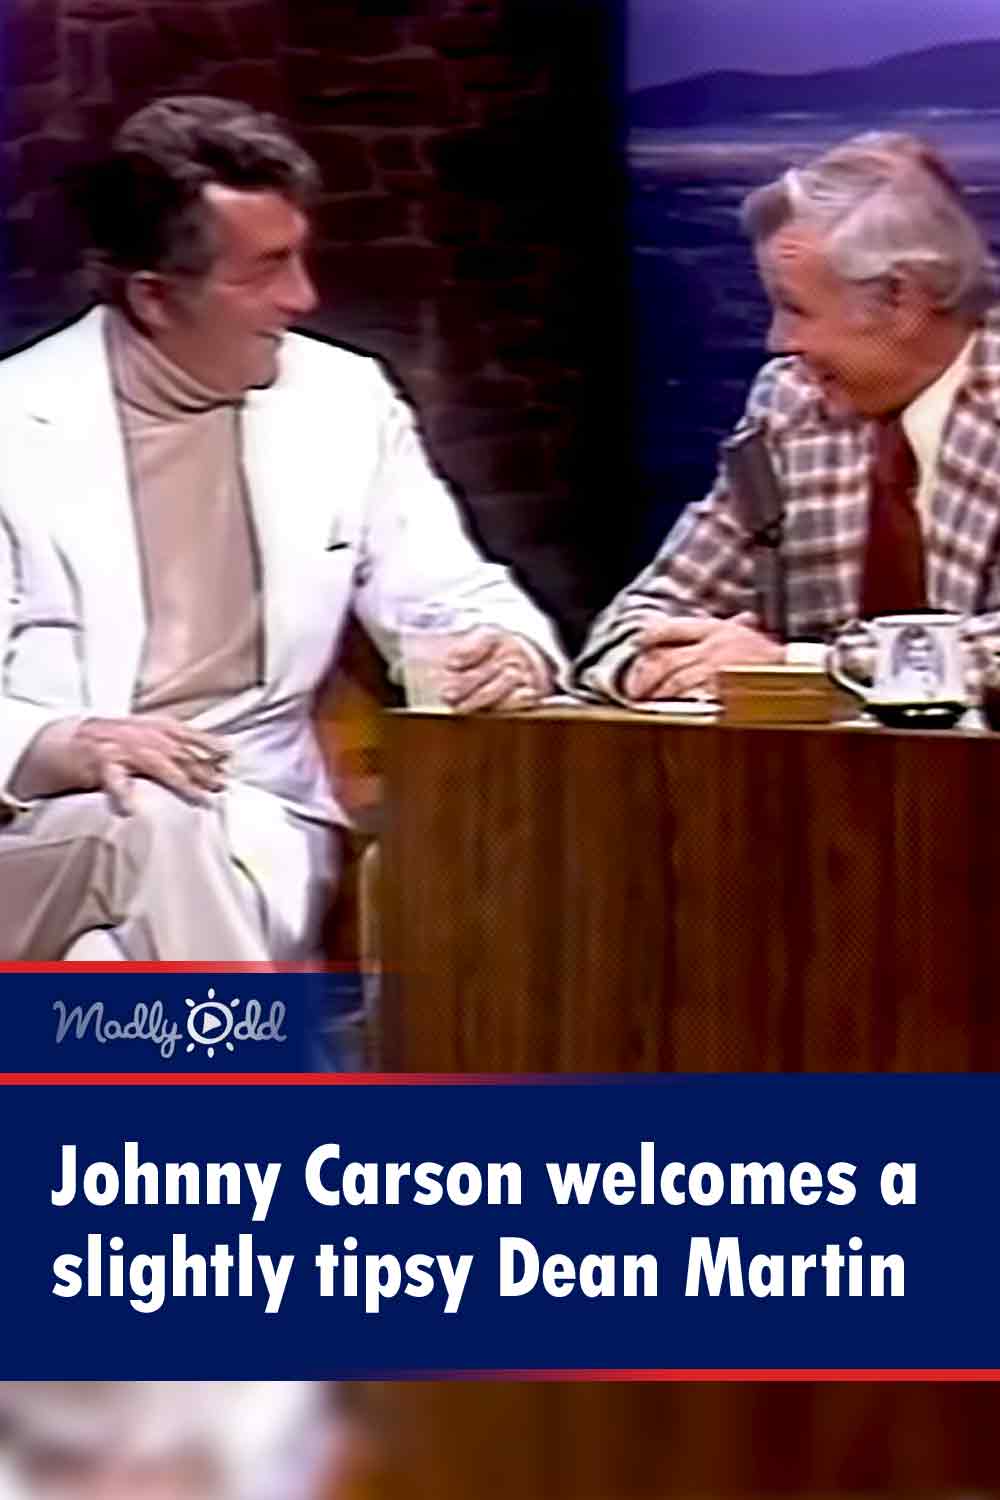 Johnny Carson welcomes a slightly tipsy Dean Martin